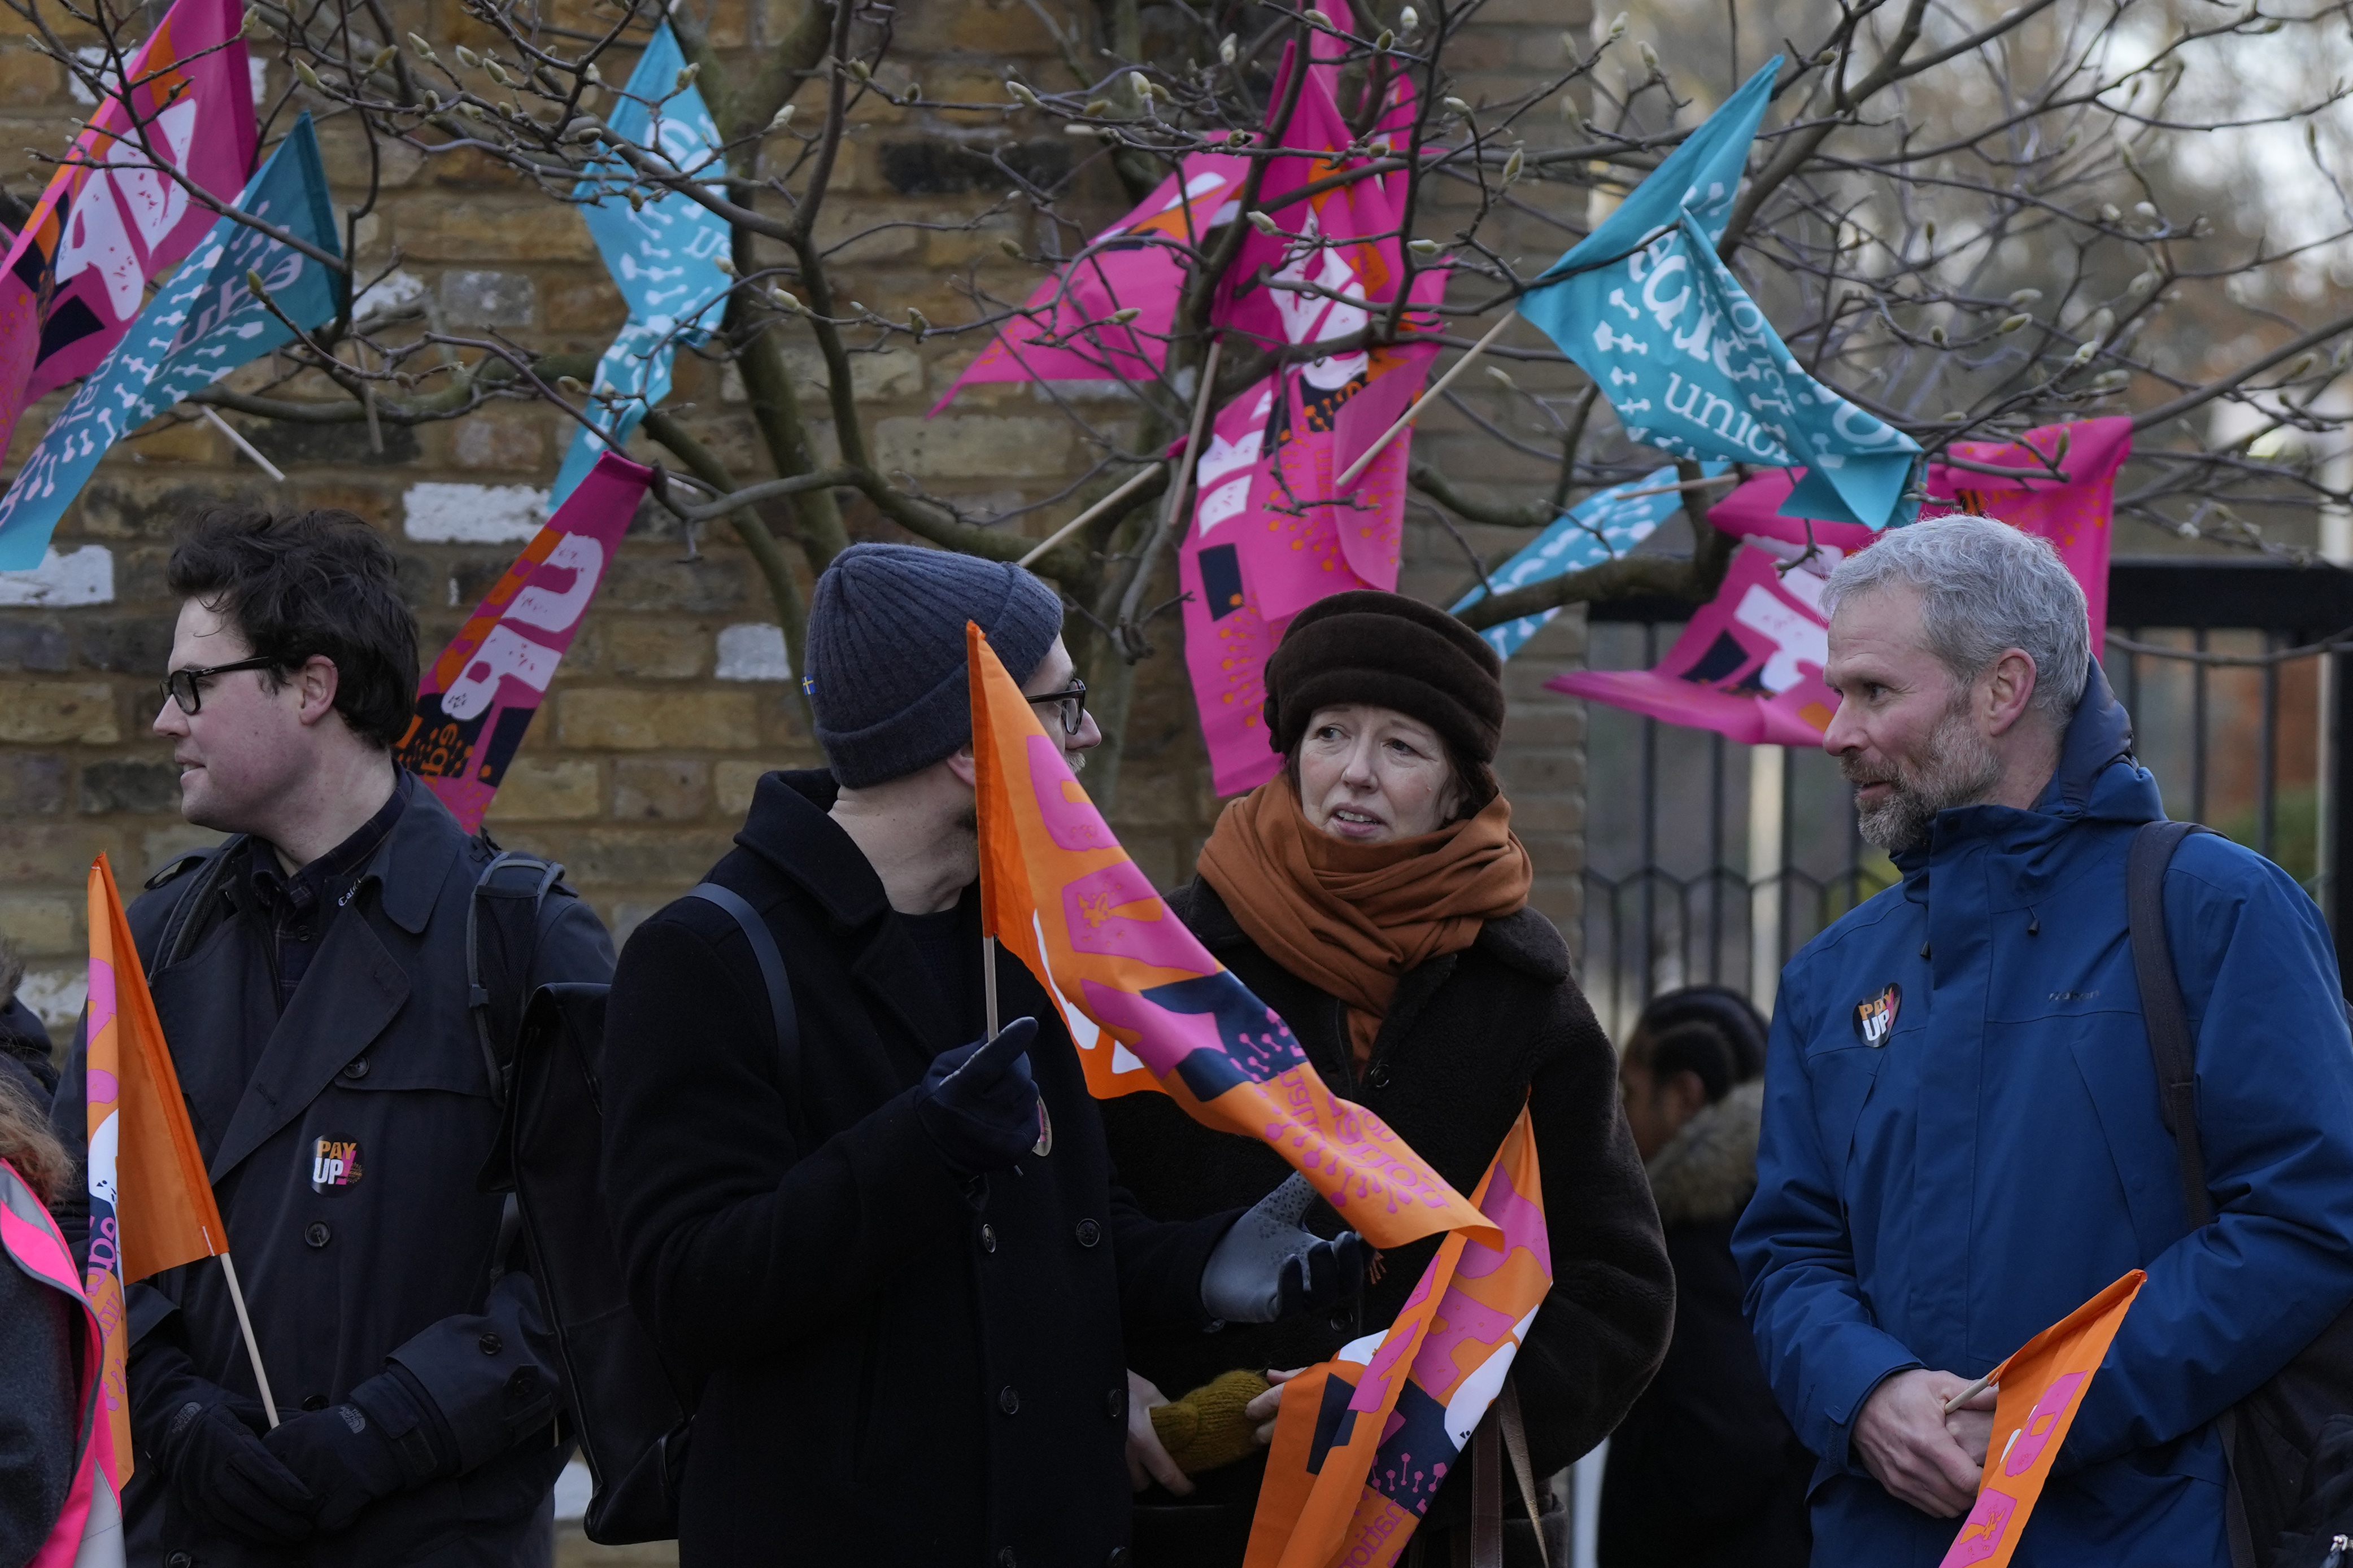 Teachers hold flags and banners outside Holland Park School during a strike over wages in London on Feb. 1, 2023. (AP Photo/Alastair Grant)